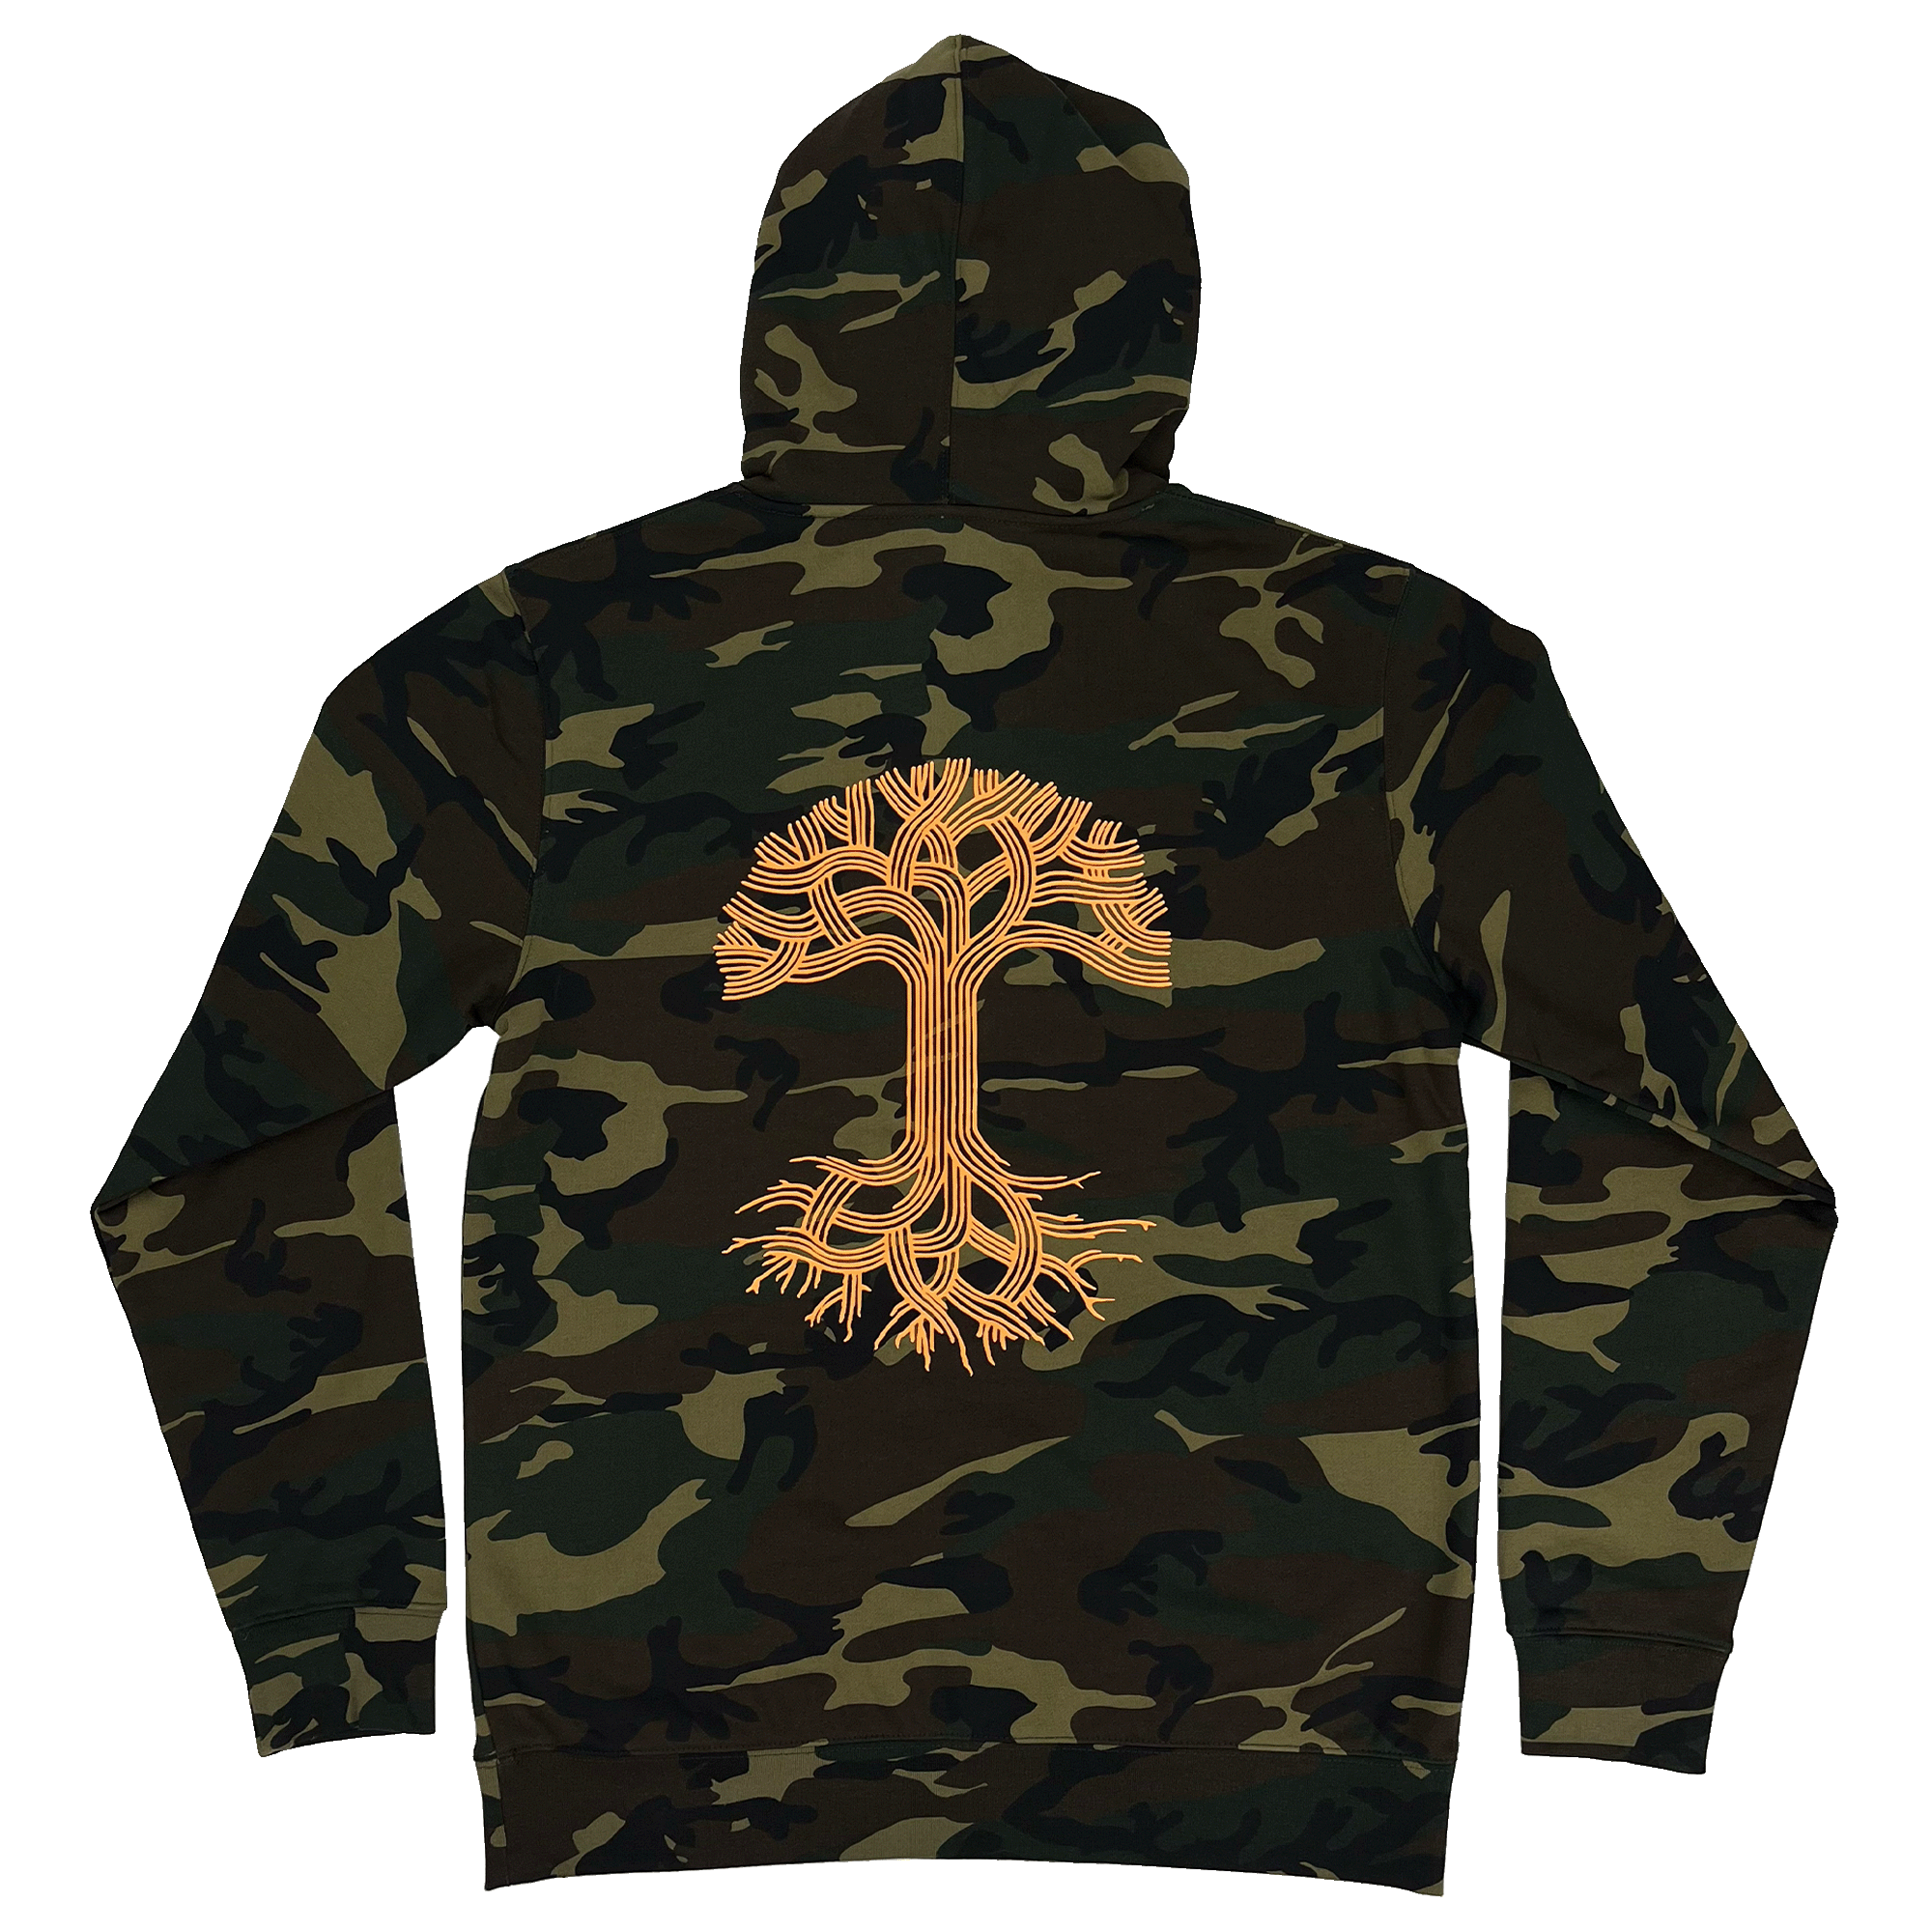 Back view of a camo pullover hoodie sweatshirt with a large orange Oaklandish tree logo in the center.